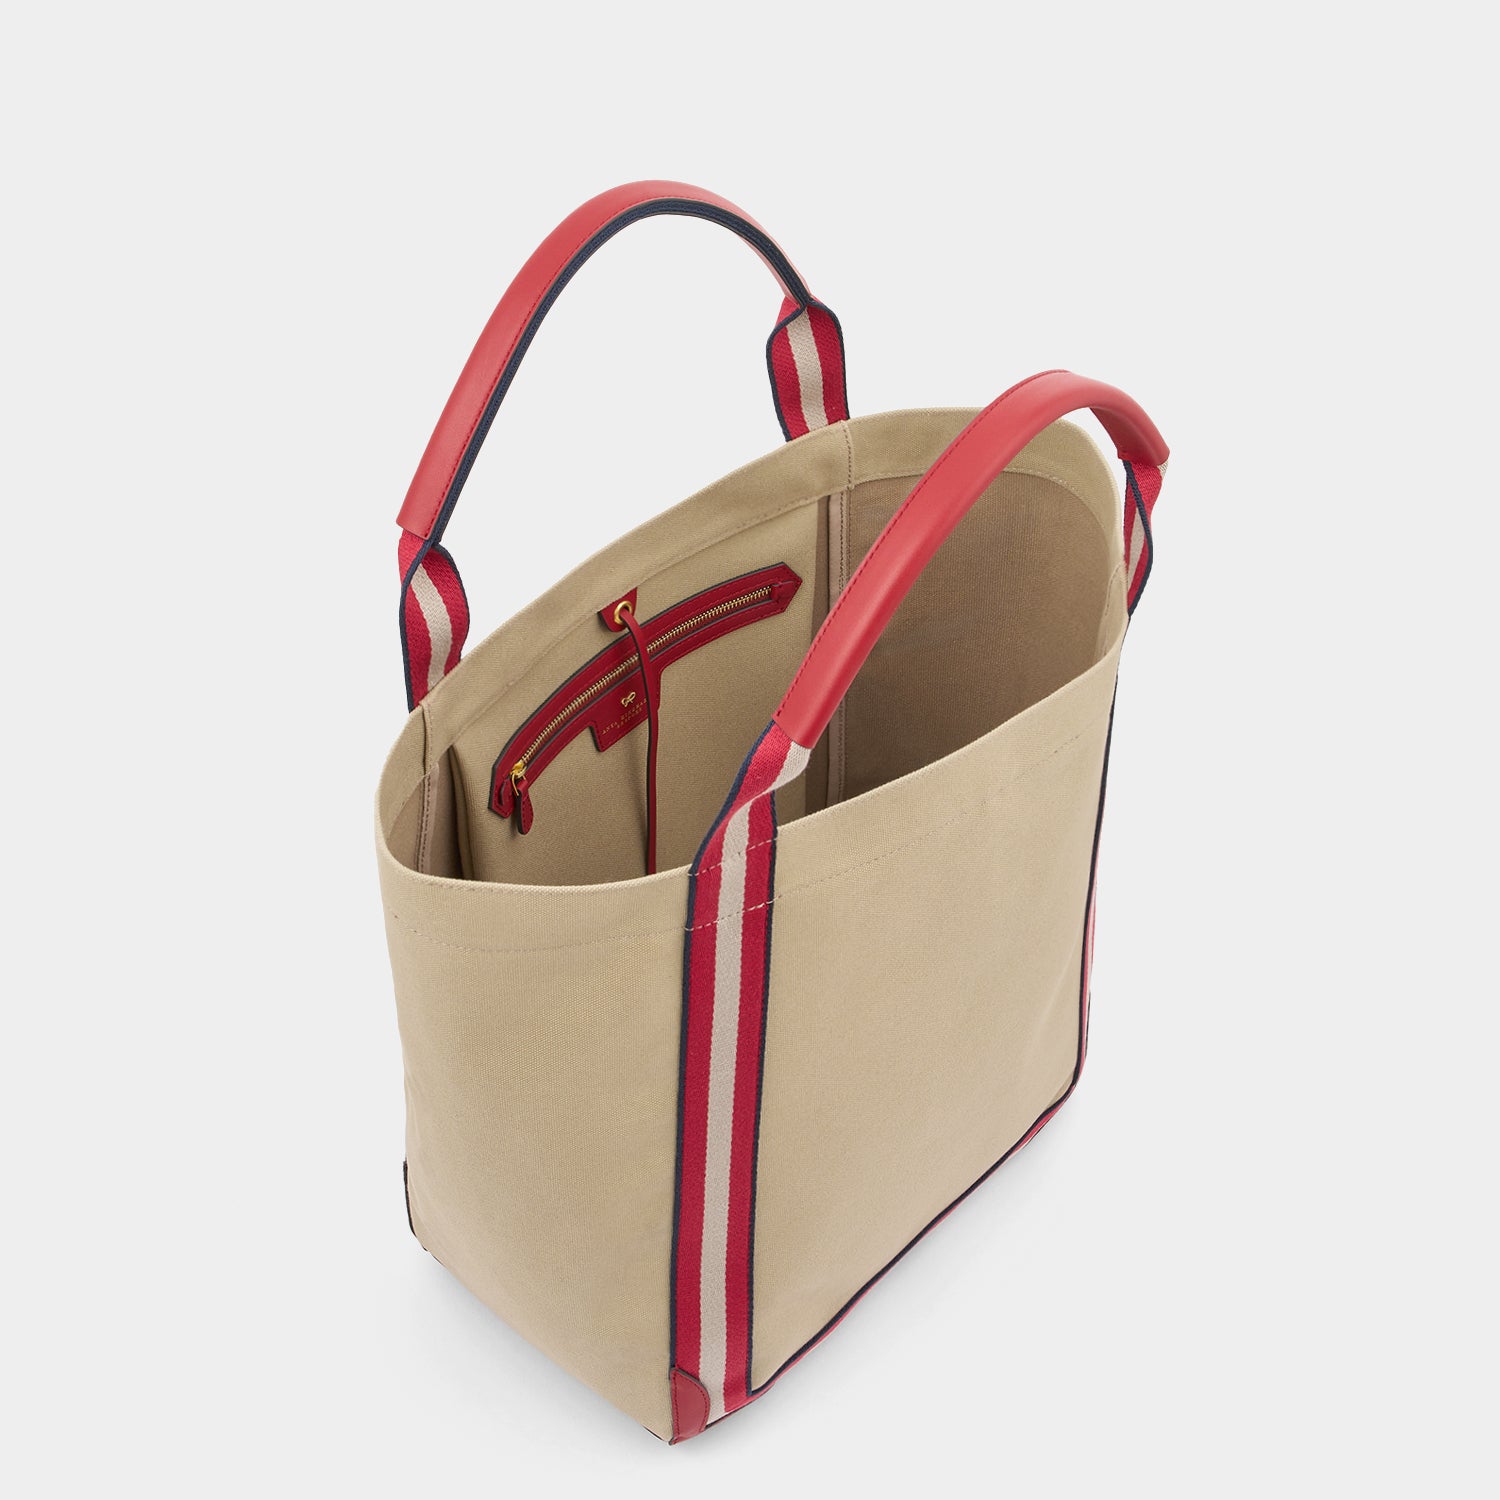 Bespoke Walton Large Tote -

                  
                    Circus Leather in Red -
                  

                  Anya Hindmarch UK
